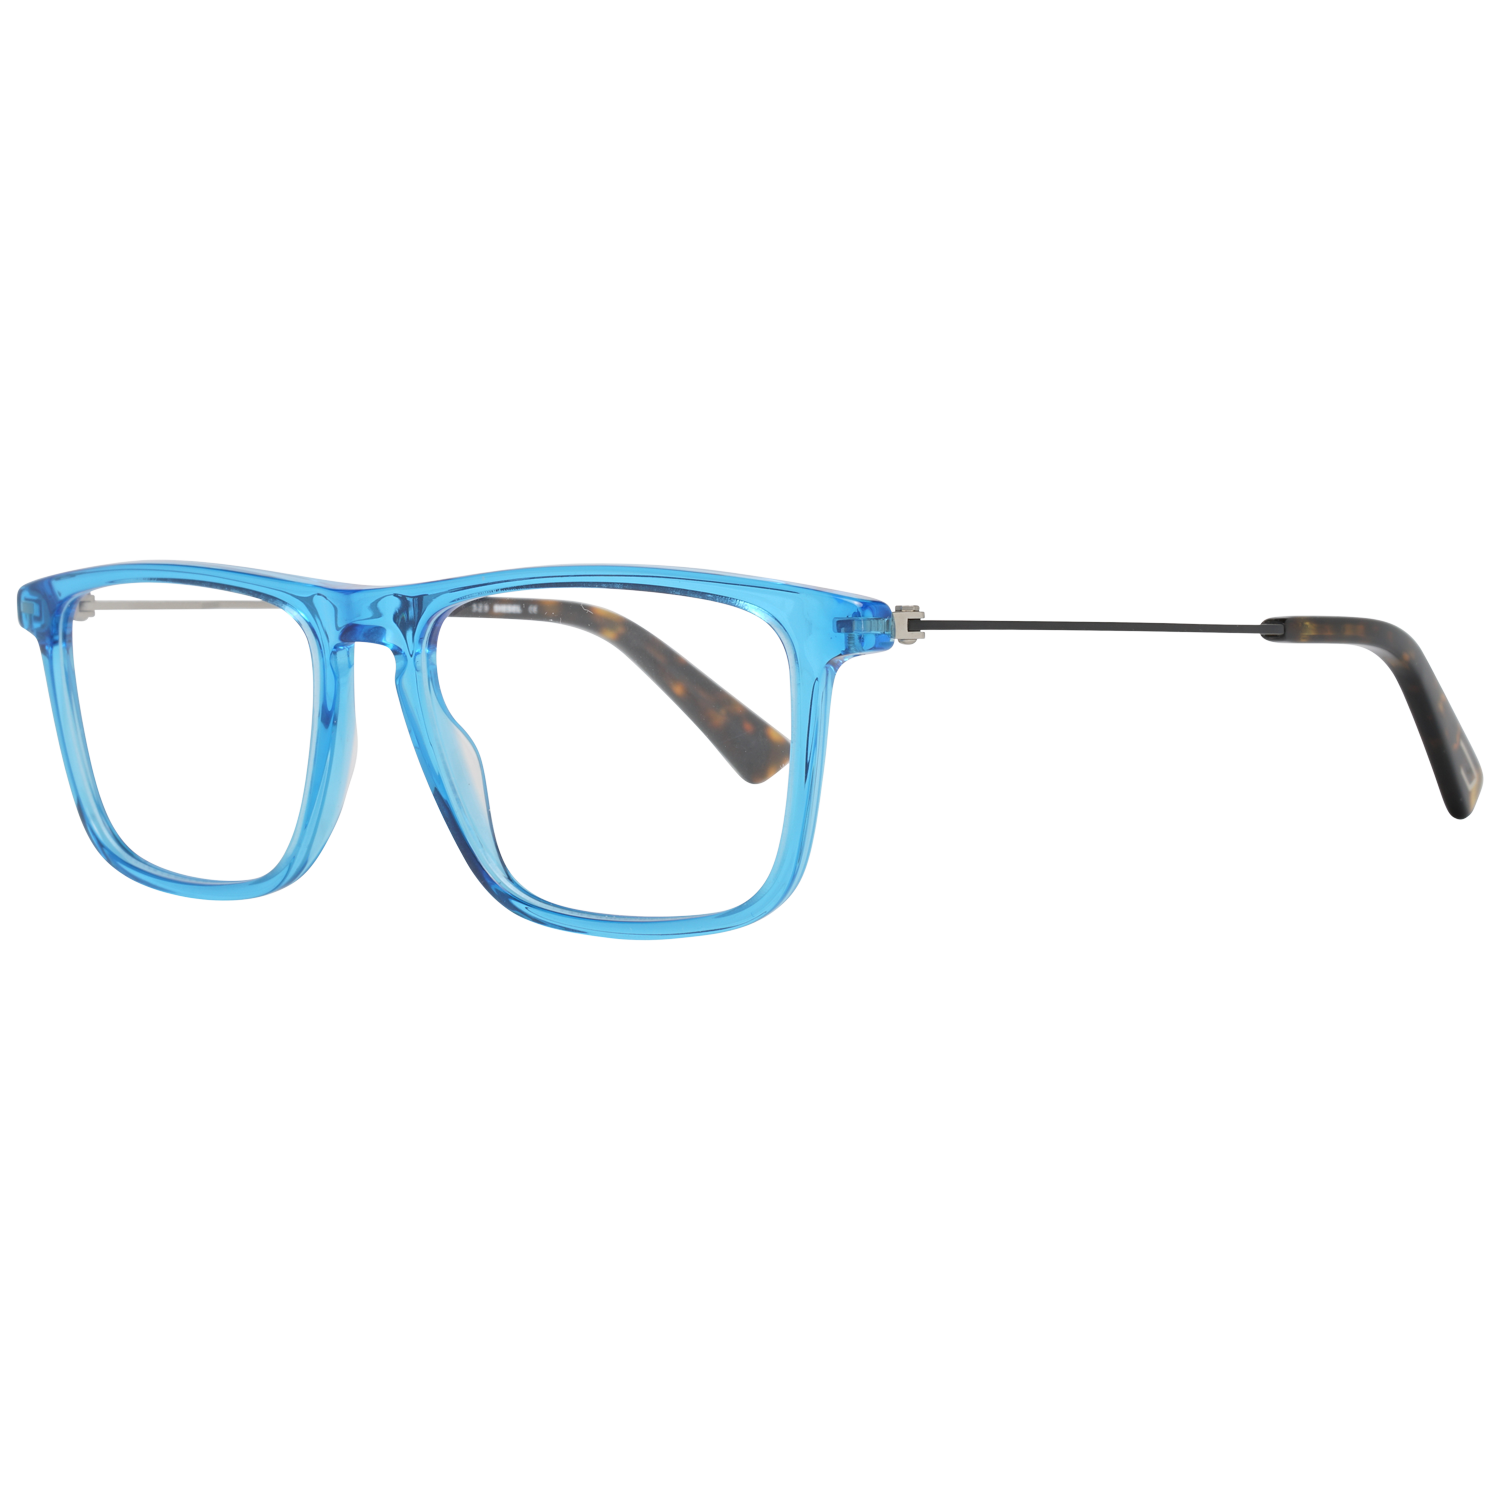 GenderMenMain colorBlueFrame colorBlueFrame materialMetal & PlasticSize54-16-145Lenses width54mmLenses heigth40mmBridge length16mmFrame width140mmTemple length145mmShipment includesCase, Cleaning clothStyleFull-RimSpring hingeNo